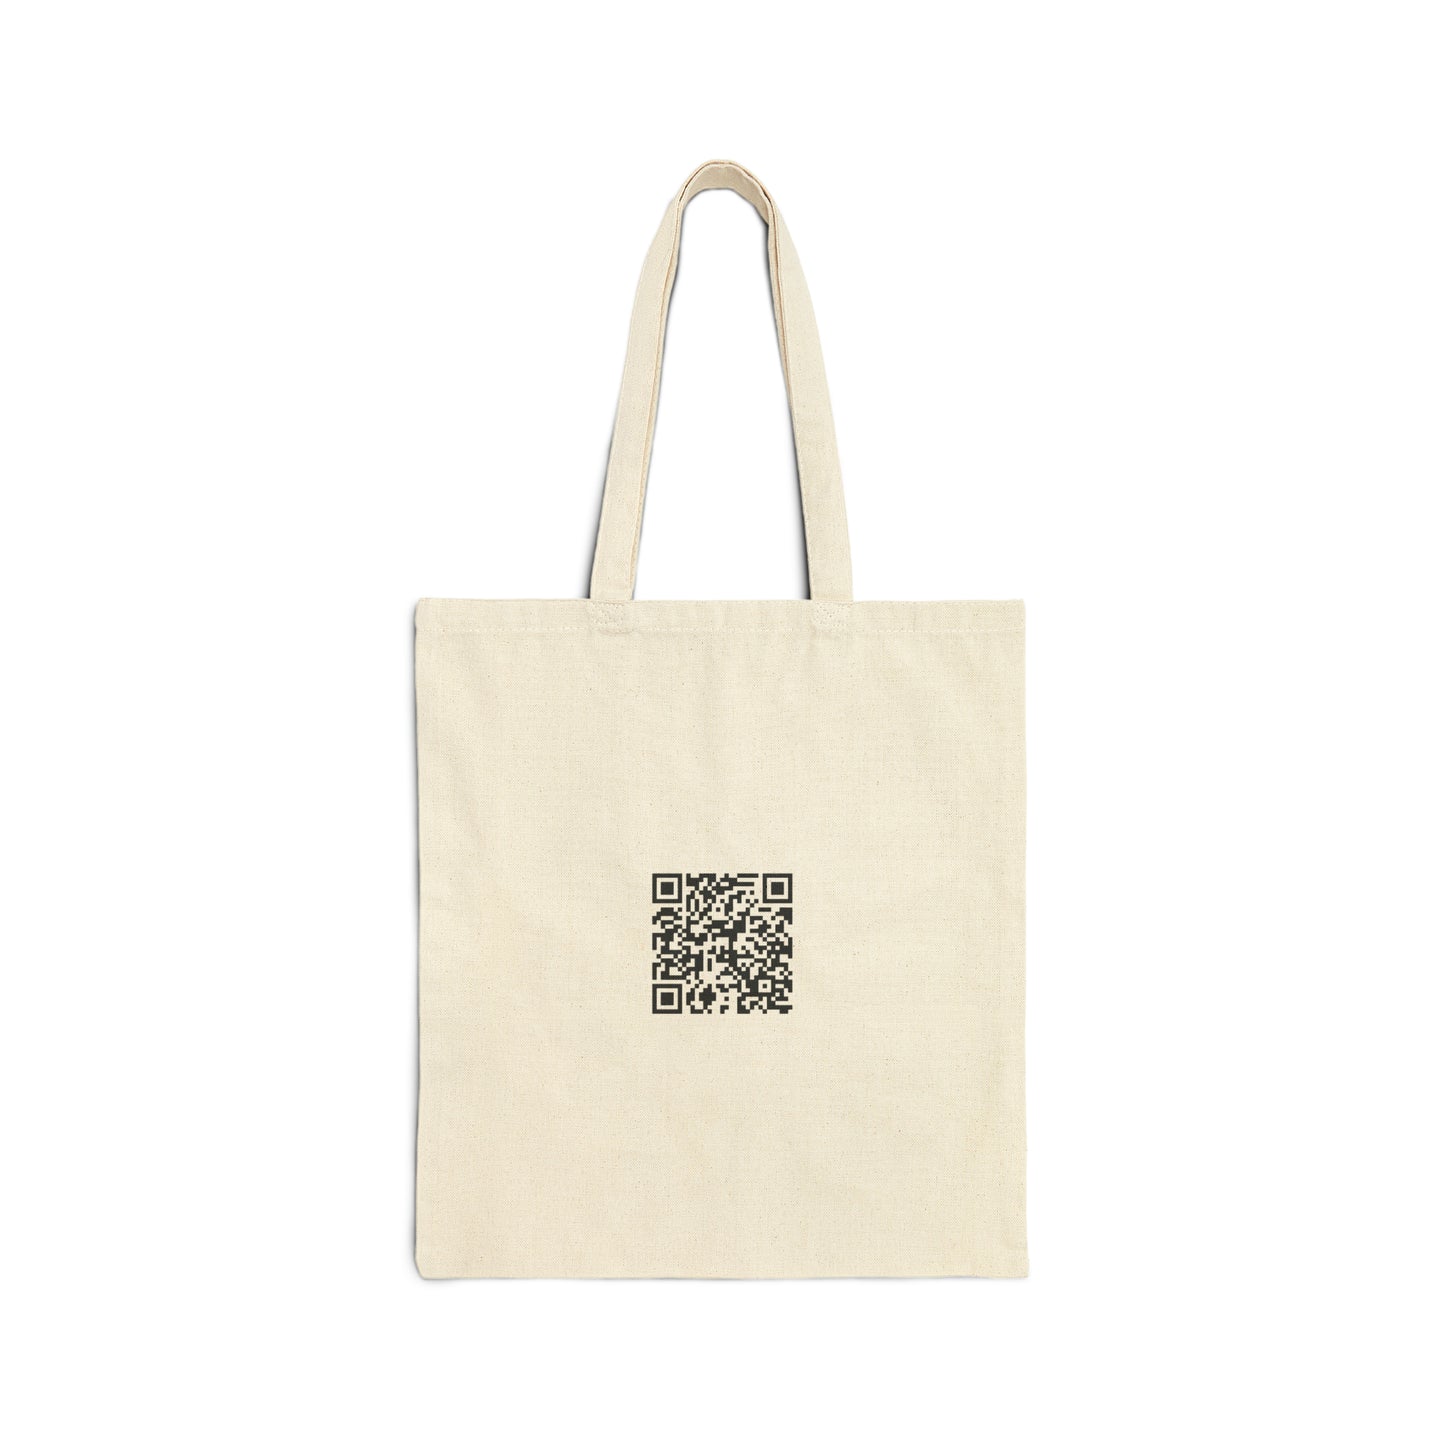 Milky Trail To Death - Cotton Canvas Tote Bag